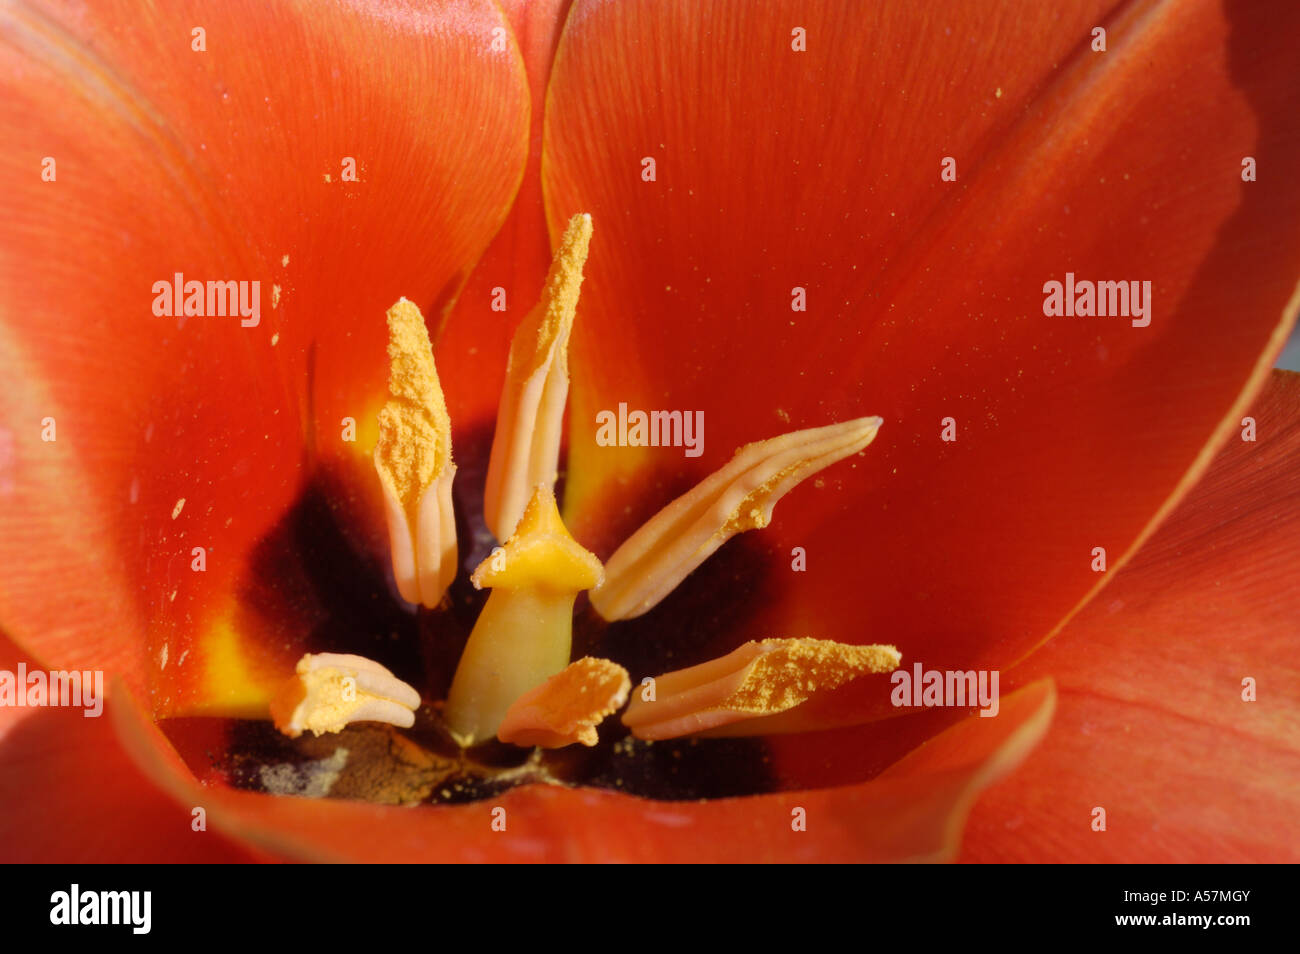 Pistil and anthers of a red Calypso tulip bloom Tulipa Greigii Hyb Stock Photo